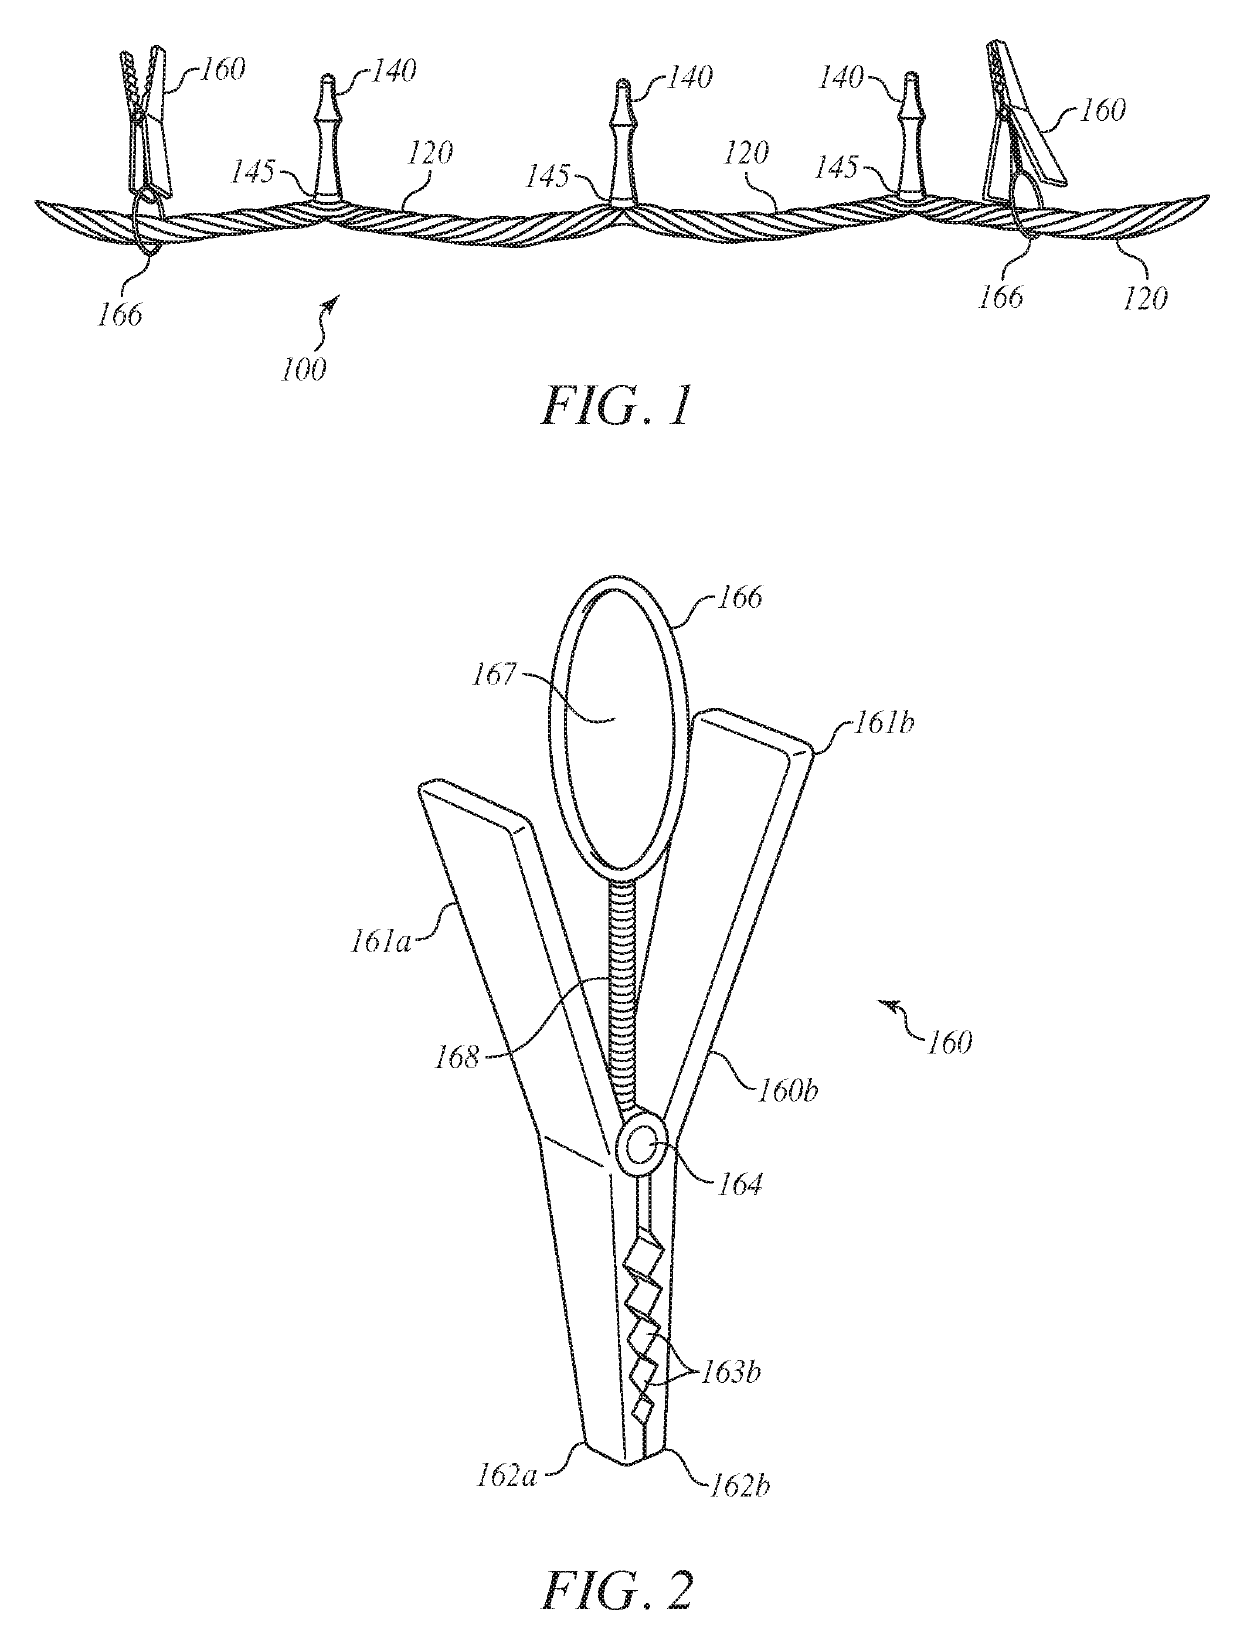 Light string with multiple movable clips